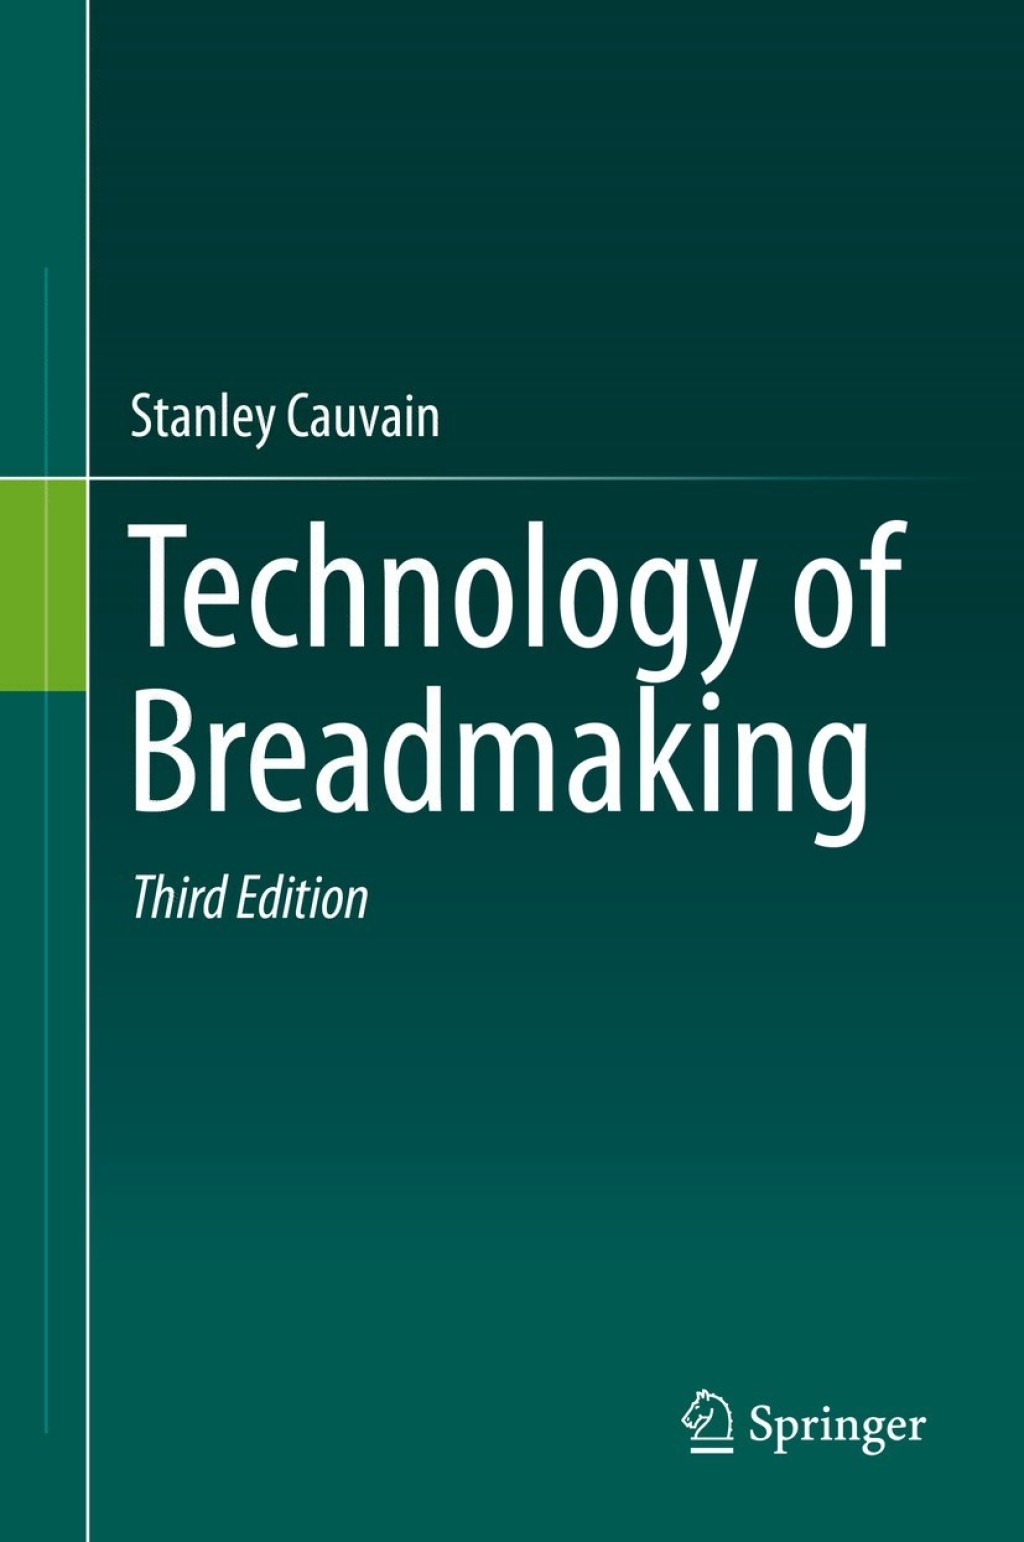 Technology of Breadmaking Stanley Cauvain Author